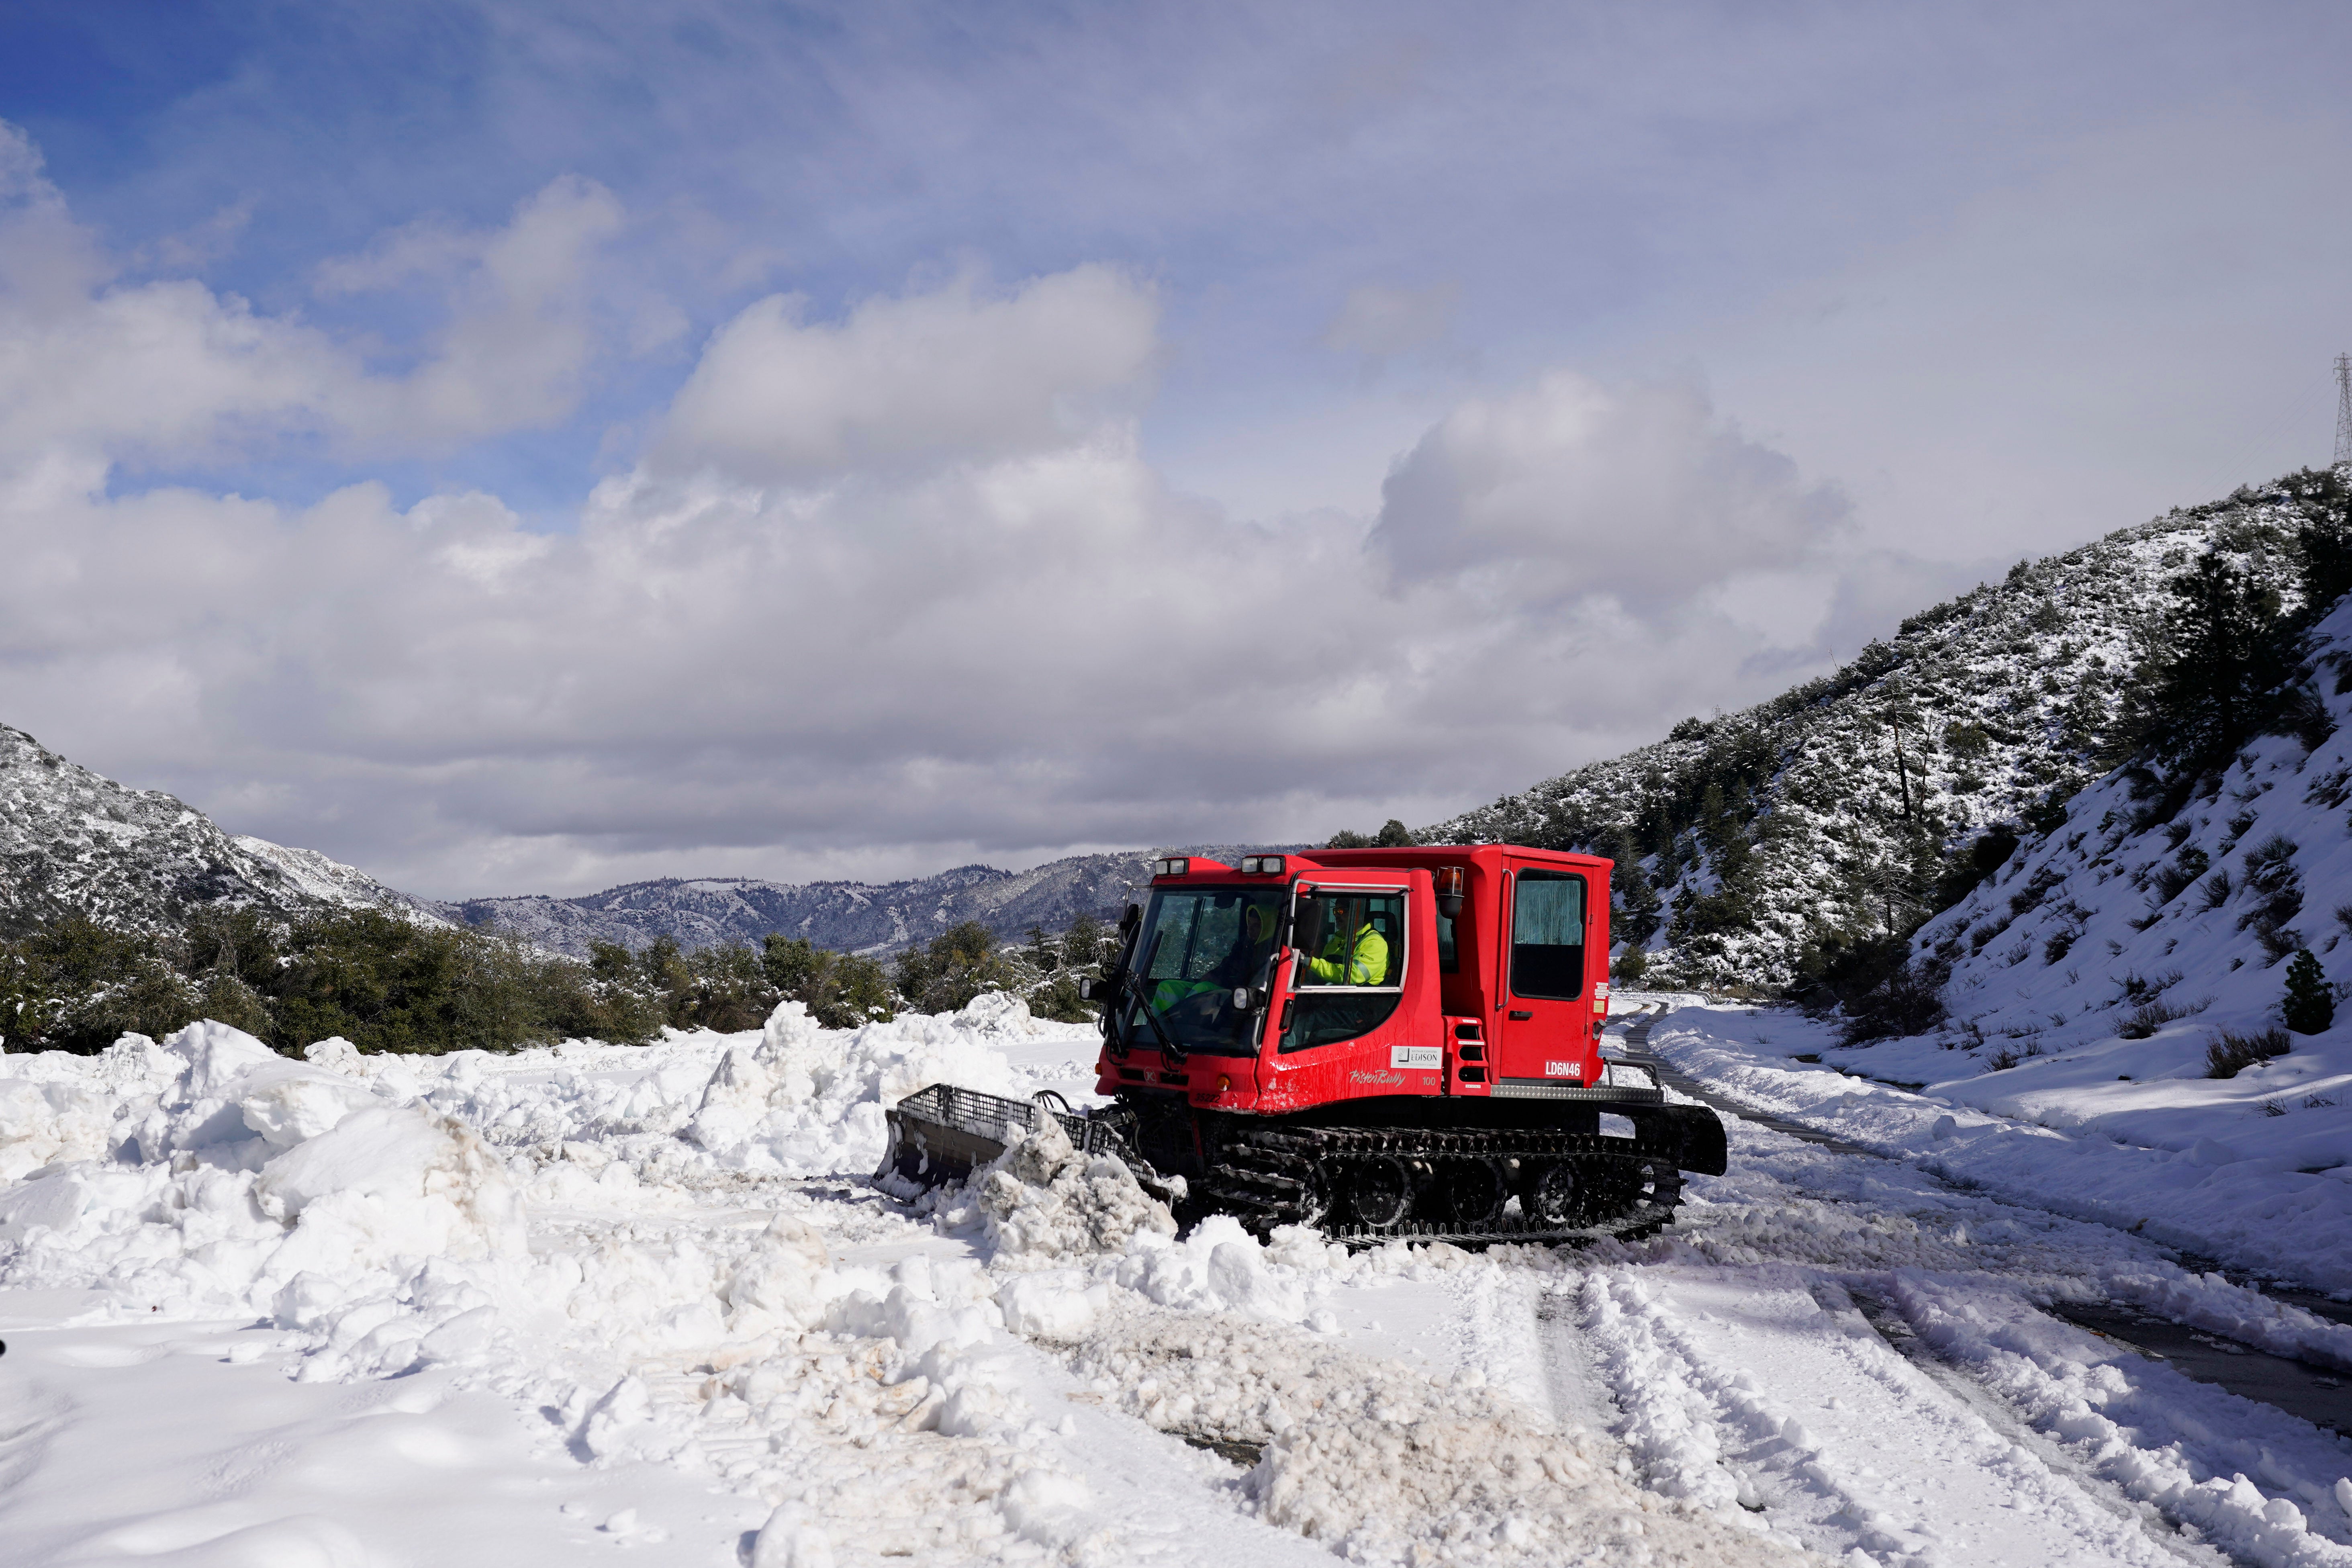 A worker plows snow along State Route 138 near Hesperia, California on Wednesday, March 1, 2023. (Photo: Jae C. Hong, AP)